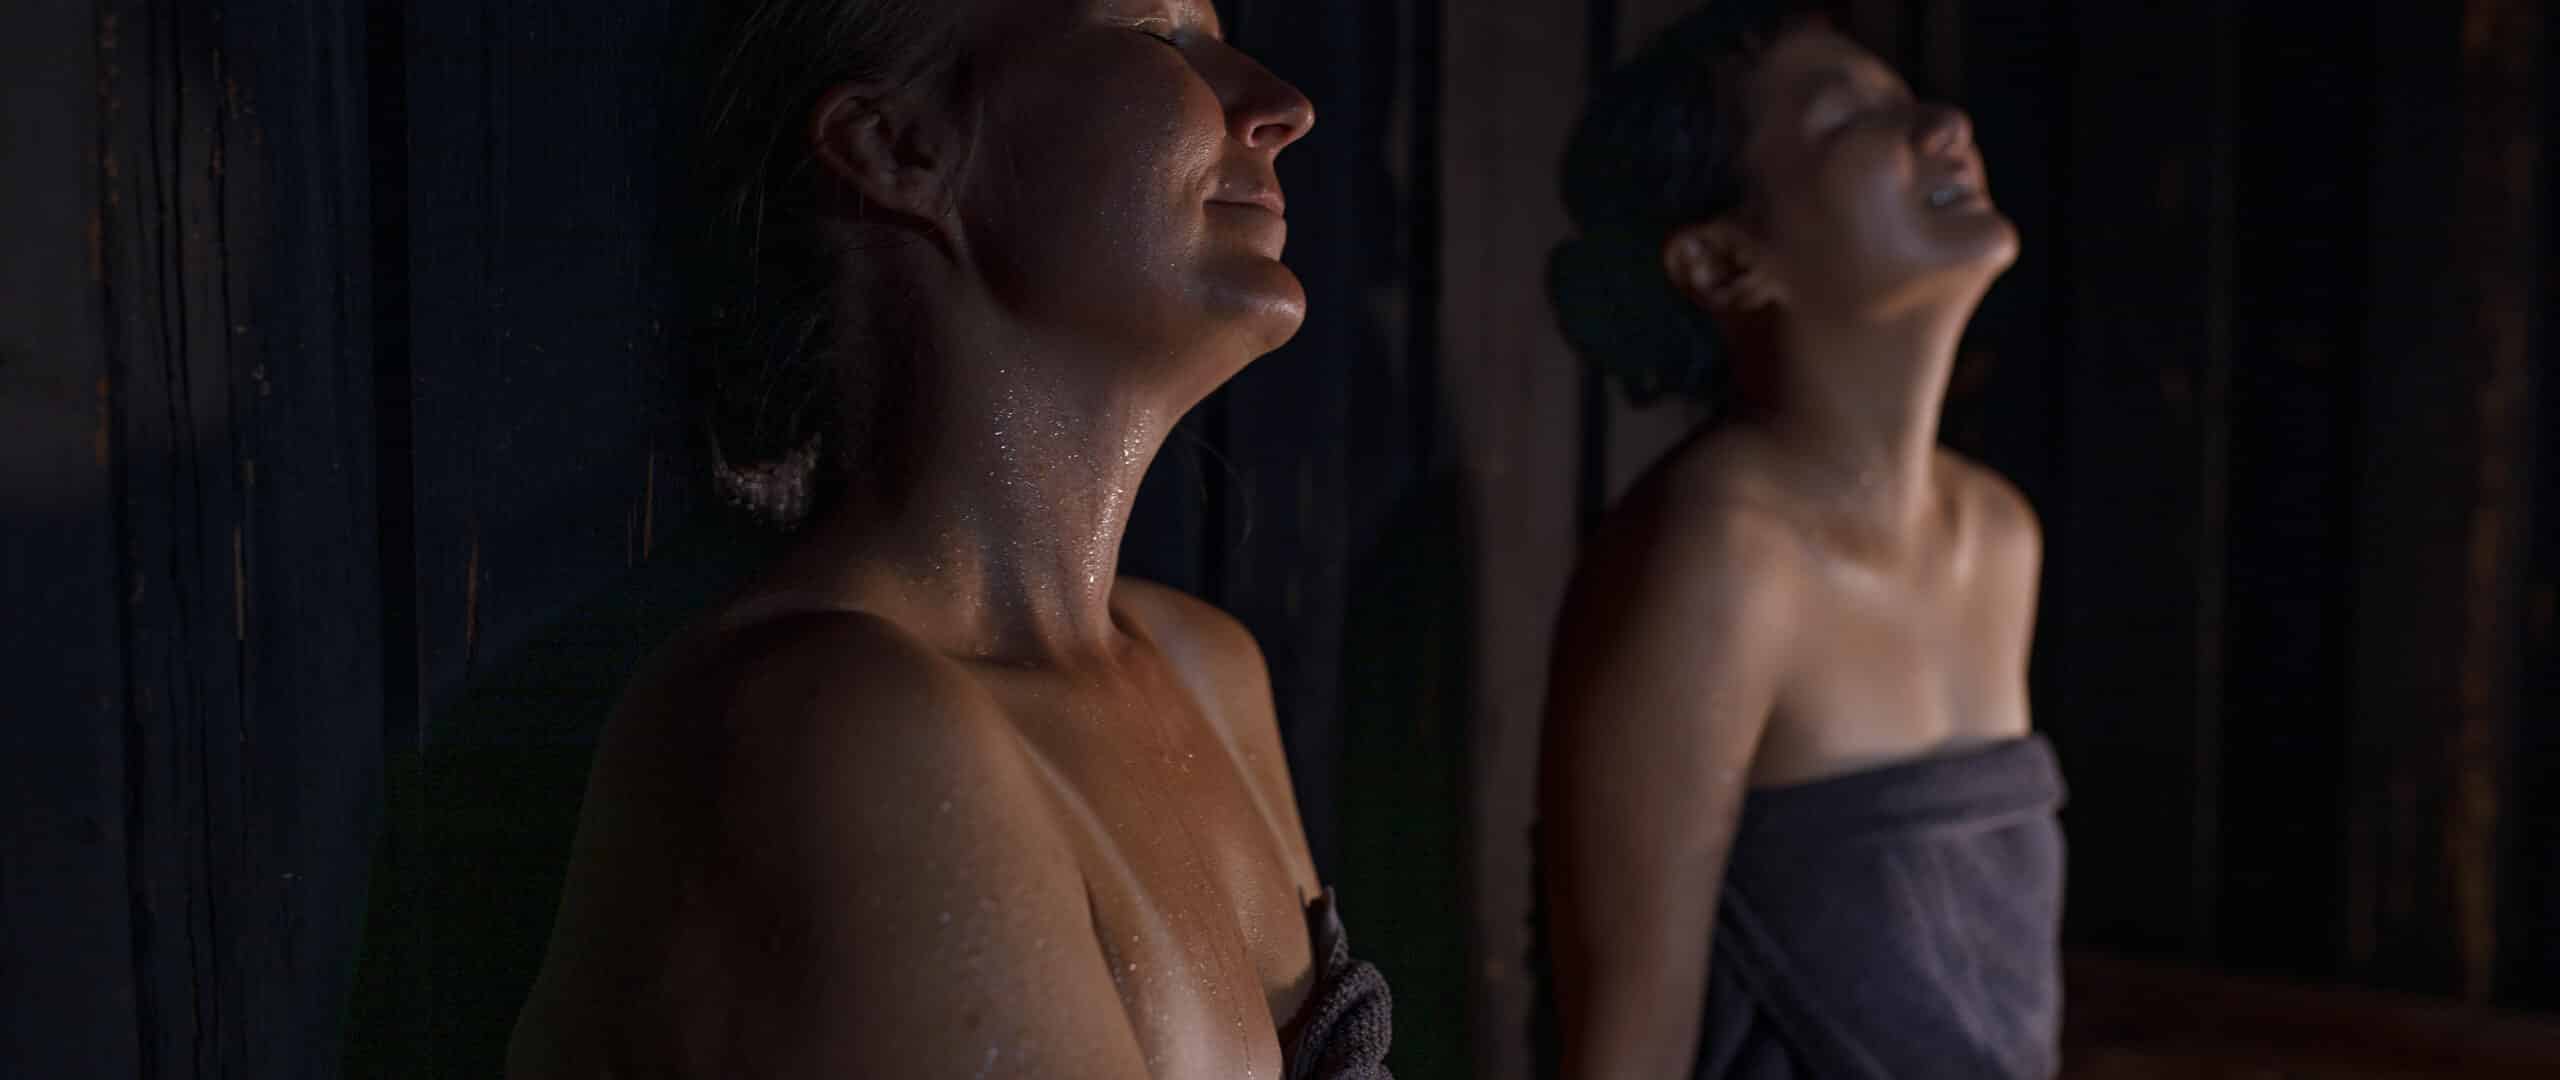 Two persons relaxing eyes closed in a sauna.